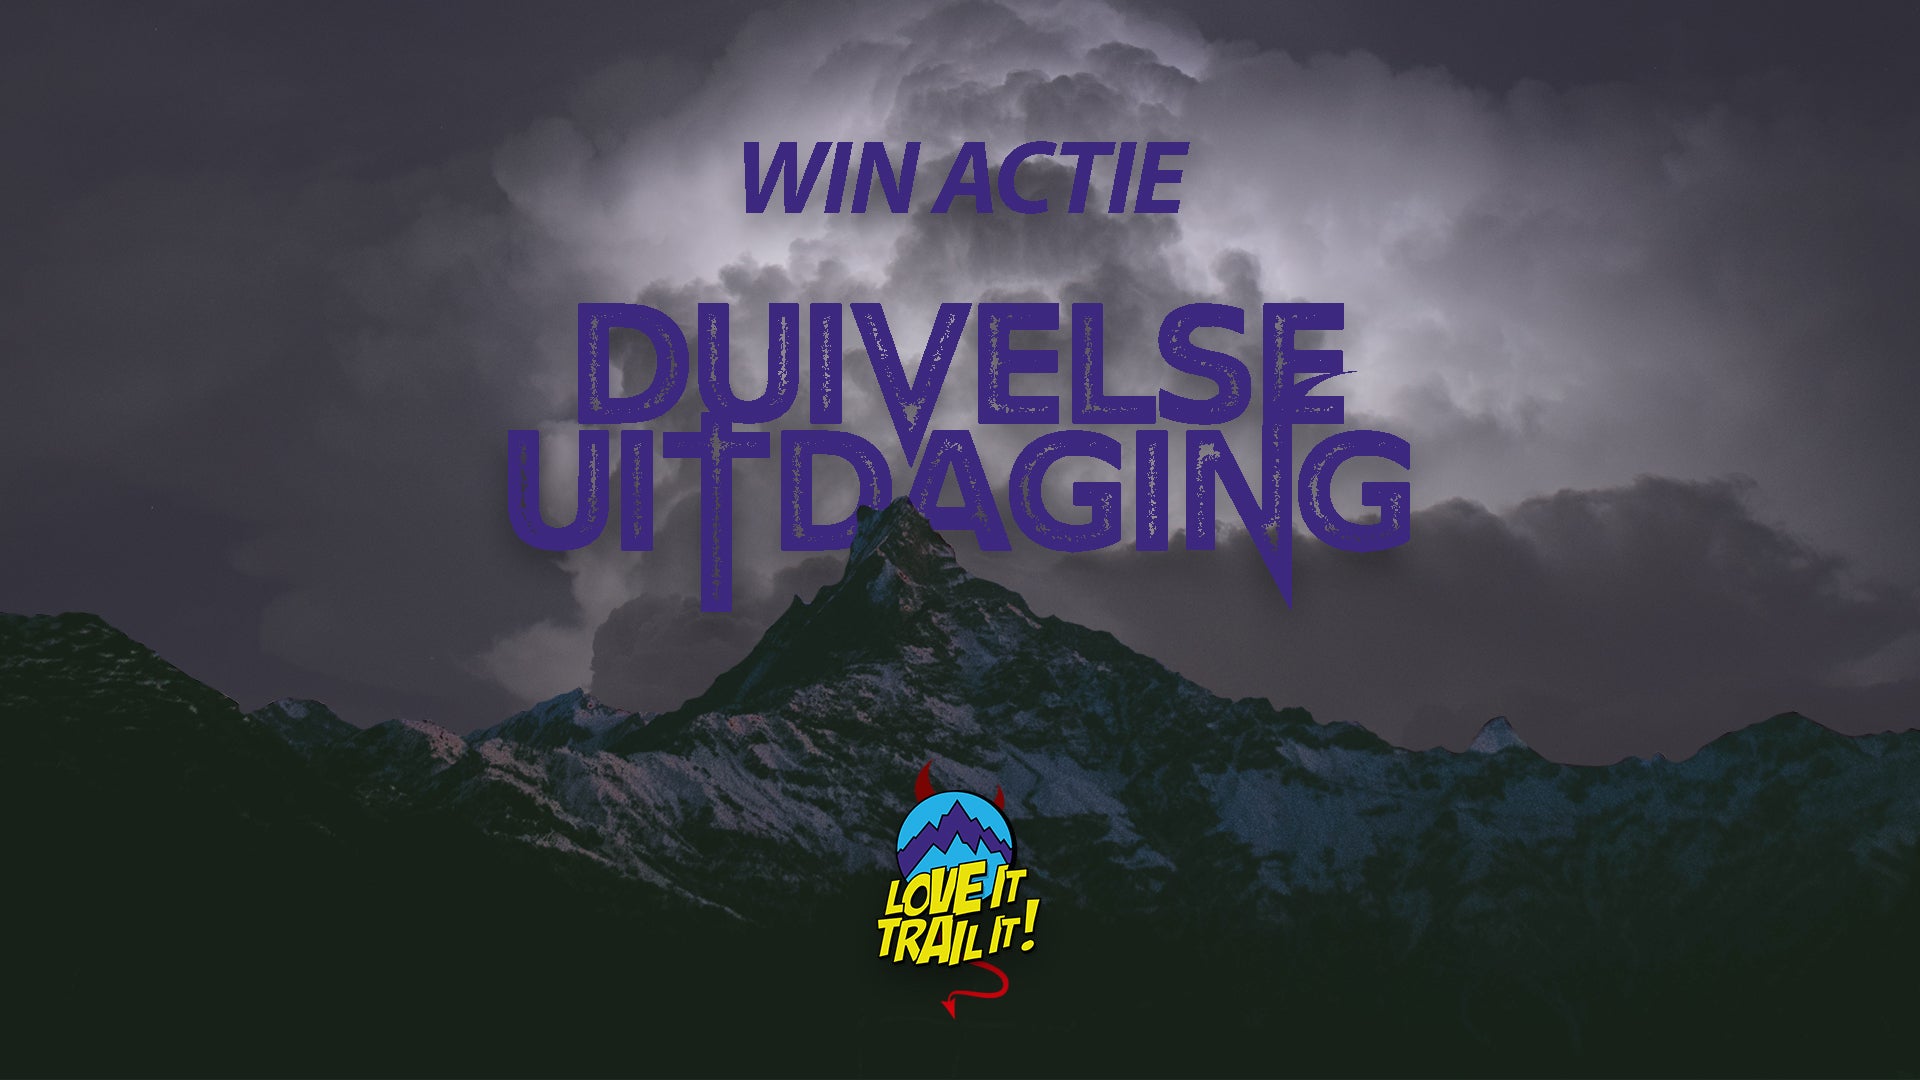 Duivelse Uitdaging !! Stay Tuned !!